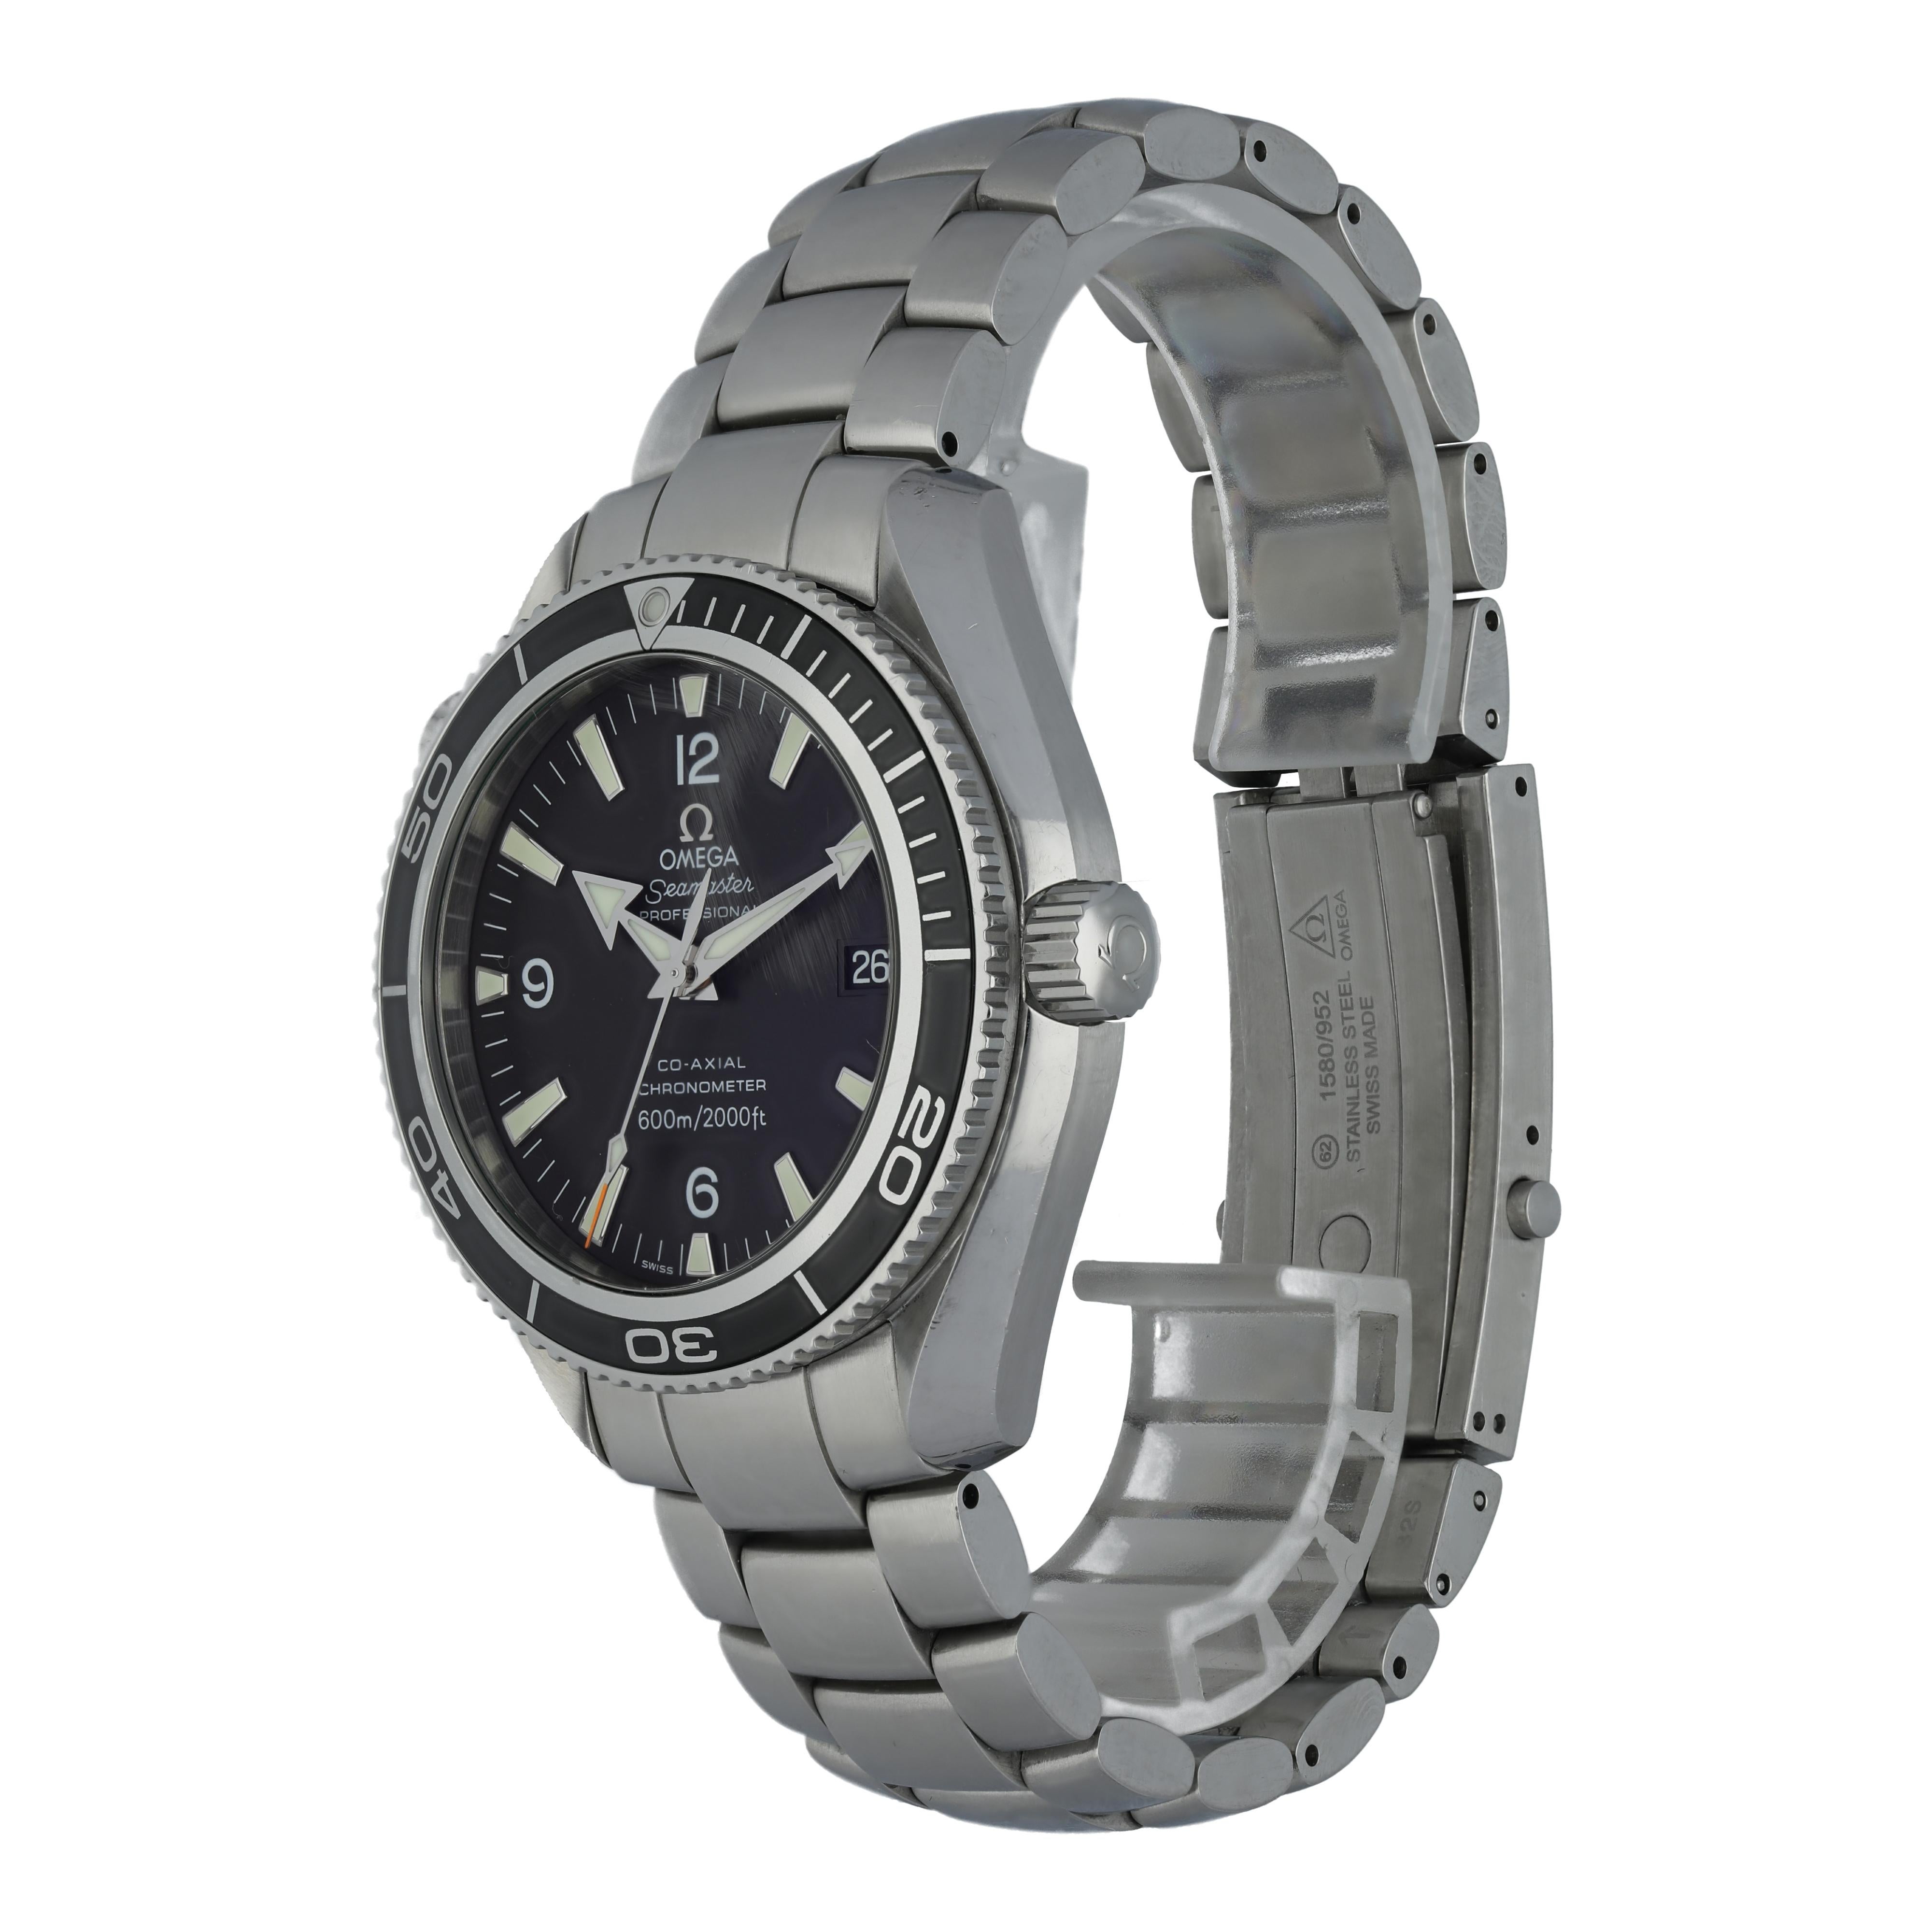 Omega Seamaster Planet Ocean 2201.50 Men's Watch. 
42mm Stainless Steel case. 
Stainless Steel Unidirectional rotating bezel. 
Black dial with Luminous Steel hands and index hour markers. 
Minute markers on the outer dial. 
Date display at the 3